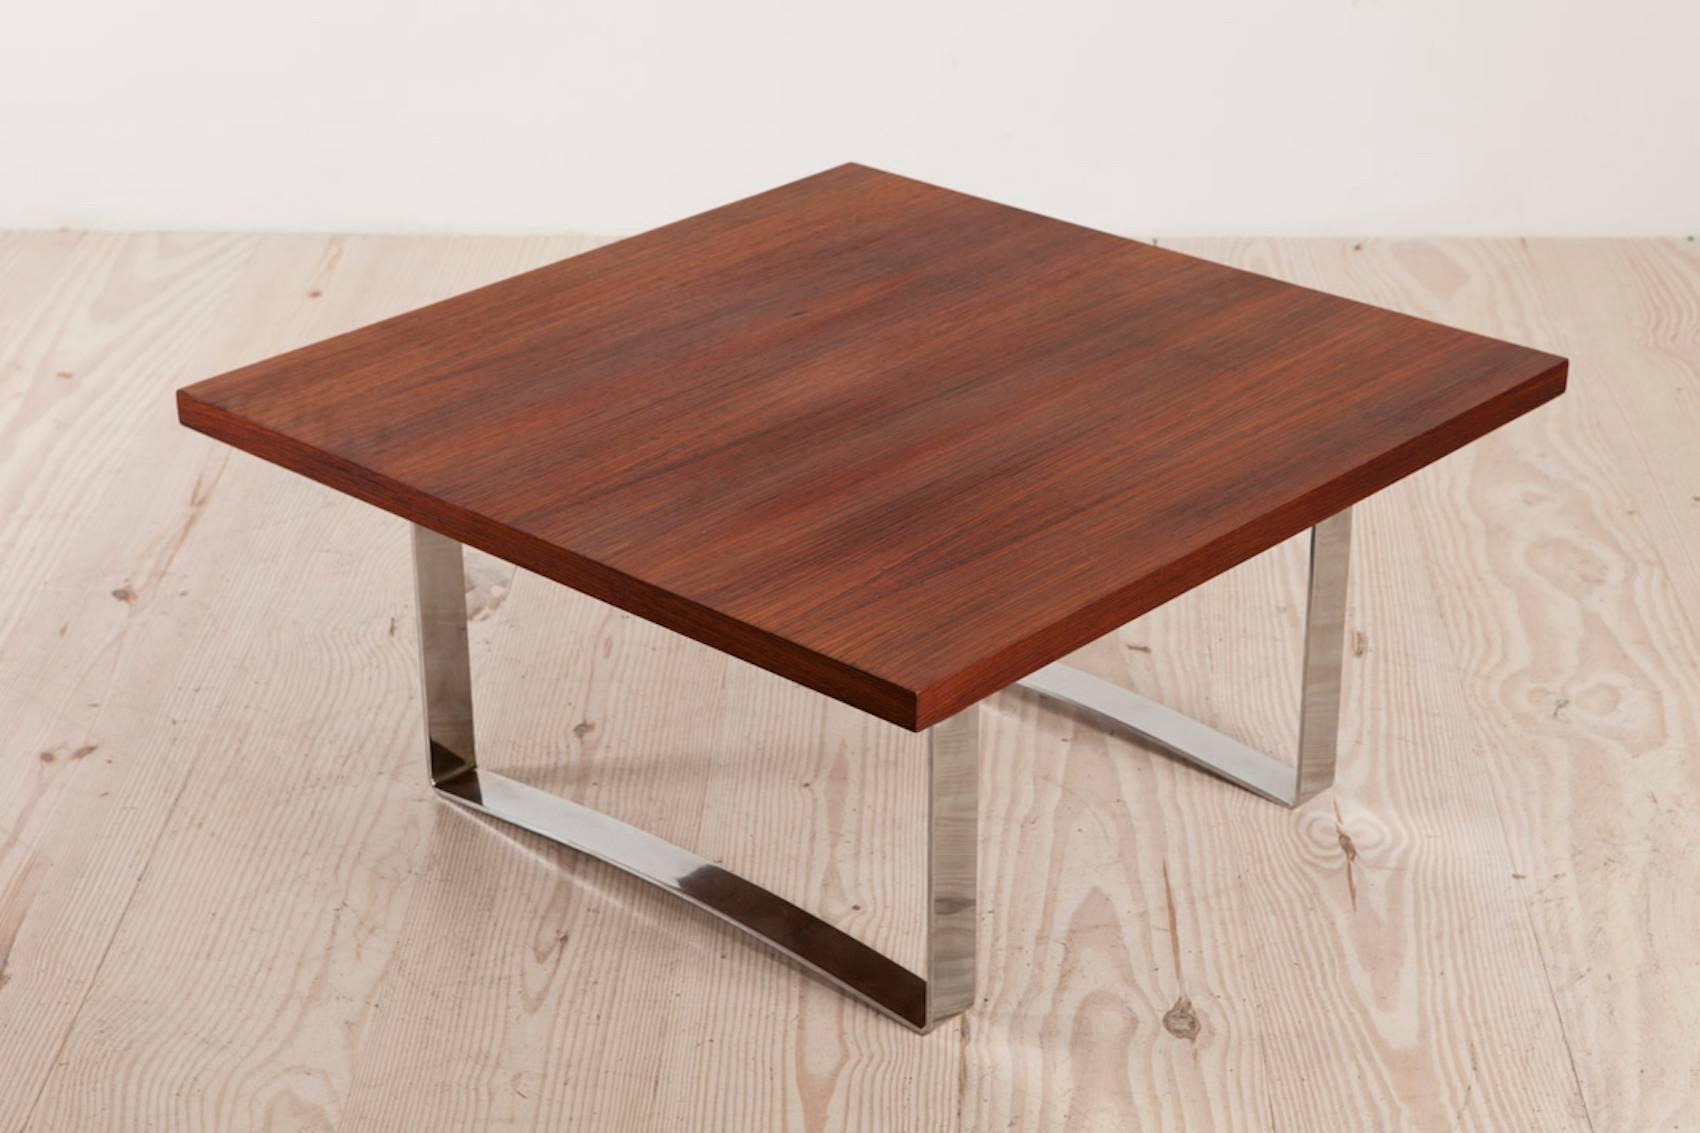 Bodil Kjaer (1932 Denmark - 1960), rare, low, square rosewood coffee table with chromed steel frame, circa 1959. The square rosewood top on two chromed steel U-form legs.